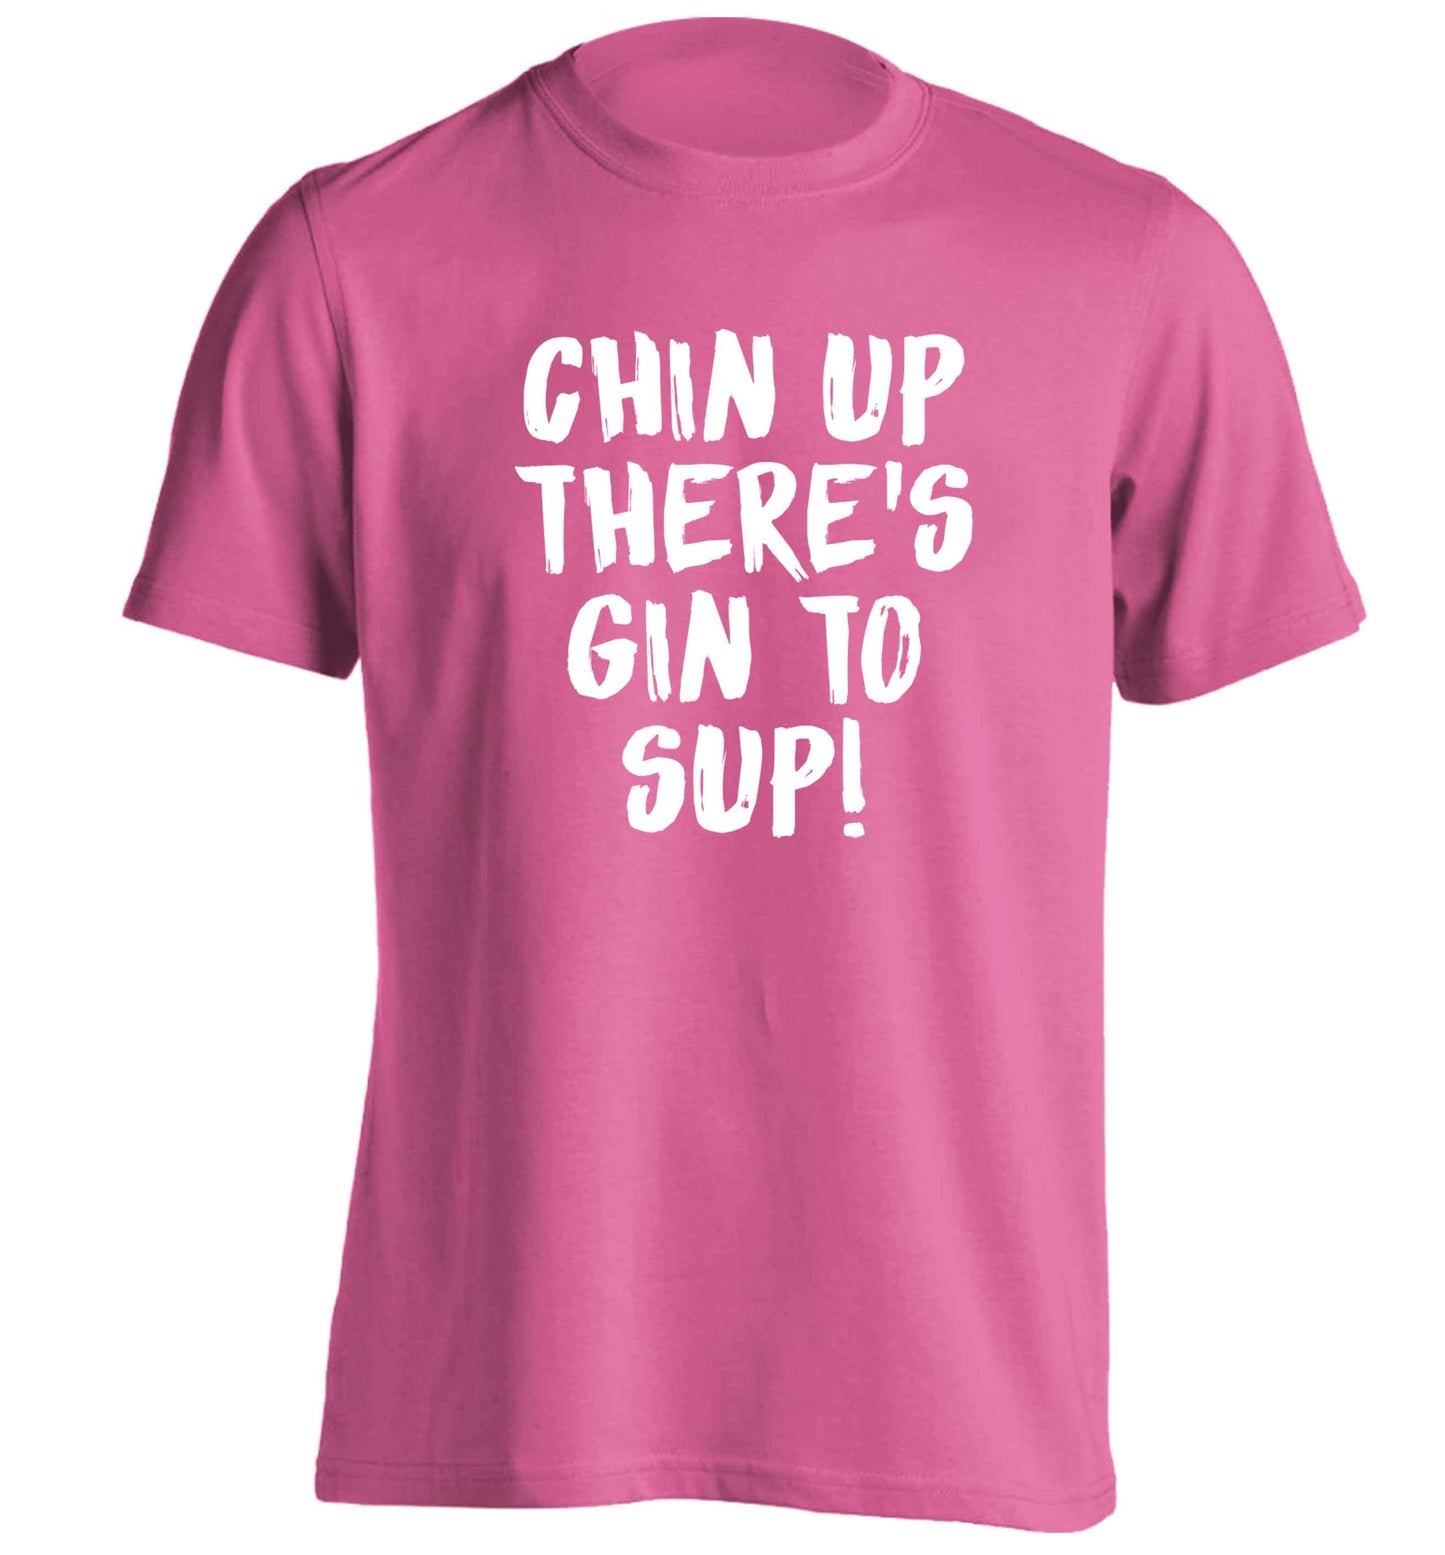 Chin up there's gin to sup adults unisex pink Tshirt 2XL